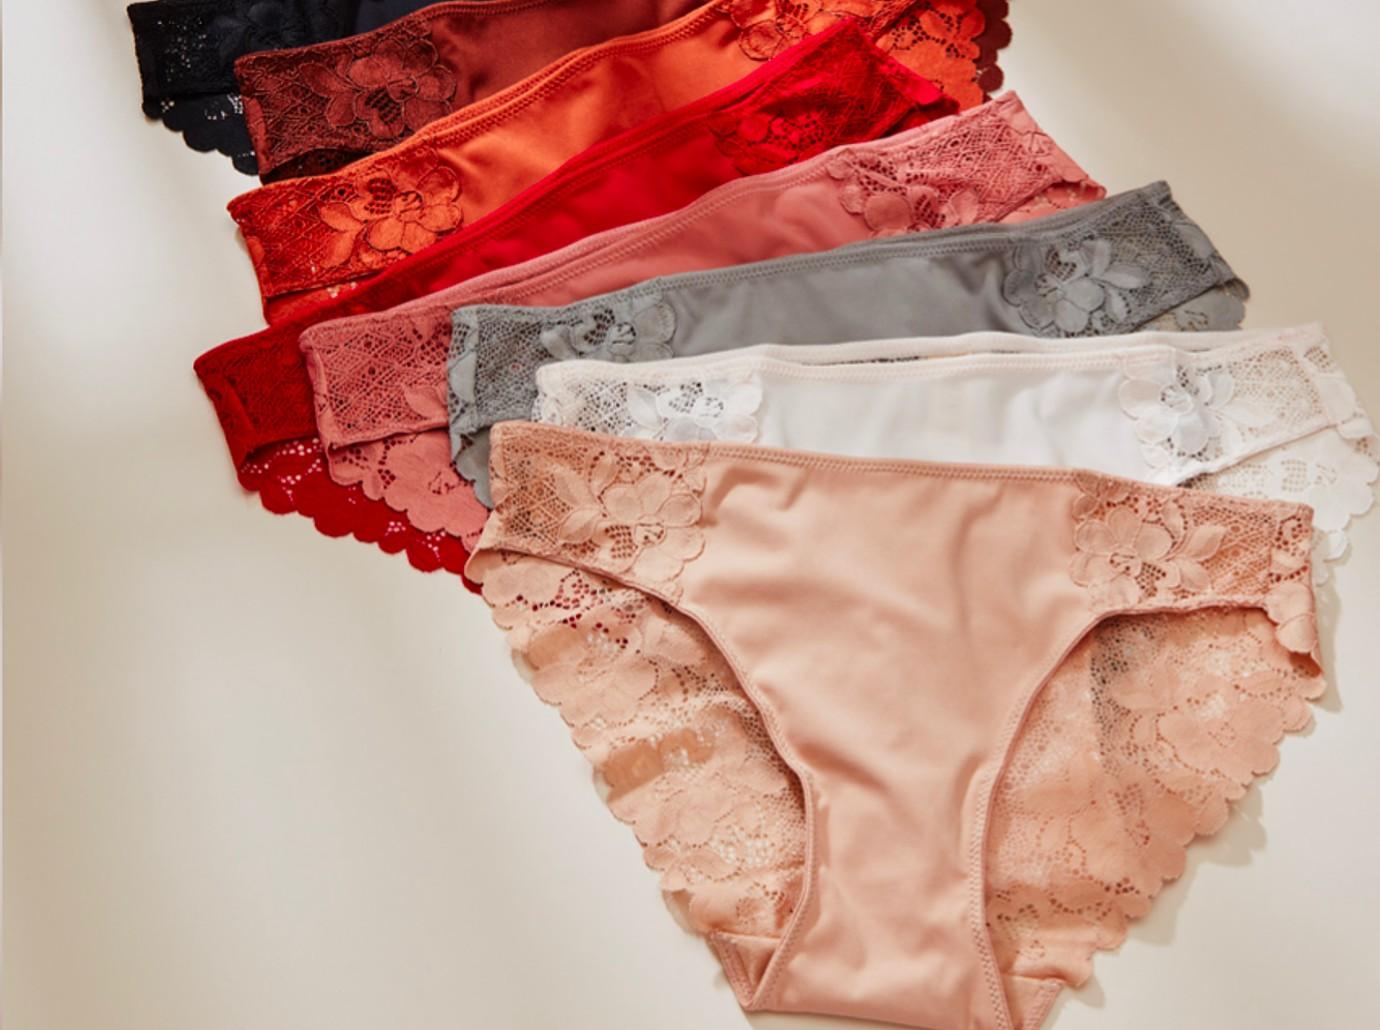 Products – Bare Necessities Lingerie